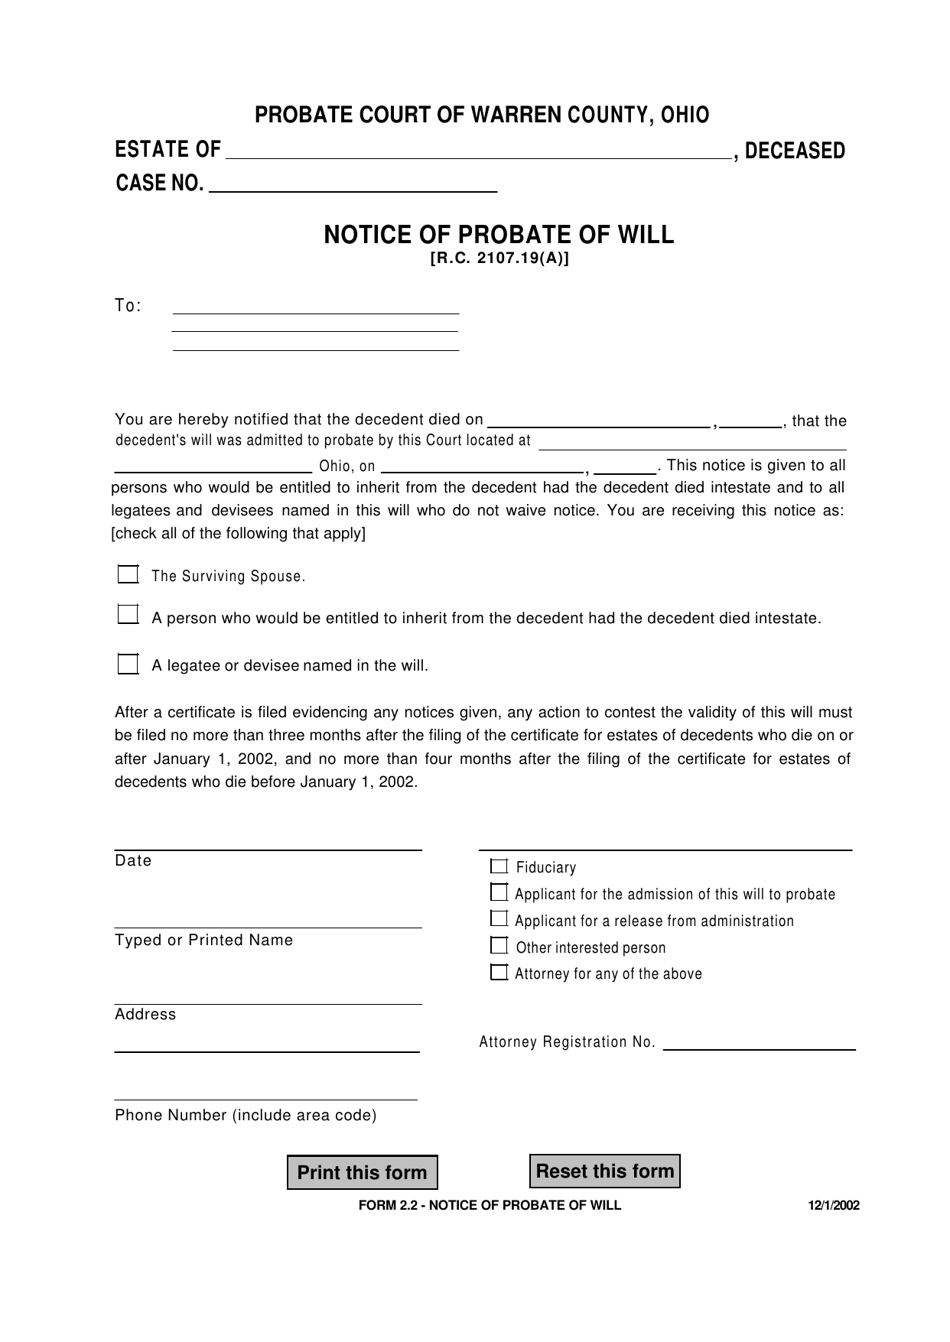 Form 2.2 Notice of Probate of Will - Warren County, Ohio, Page 1